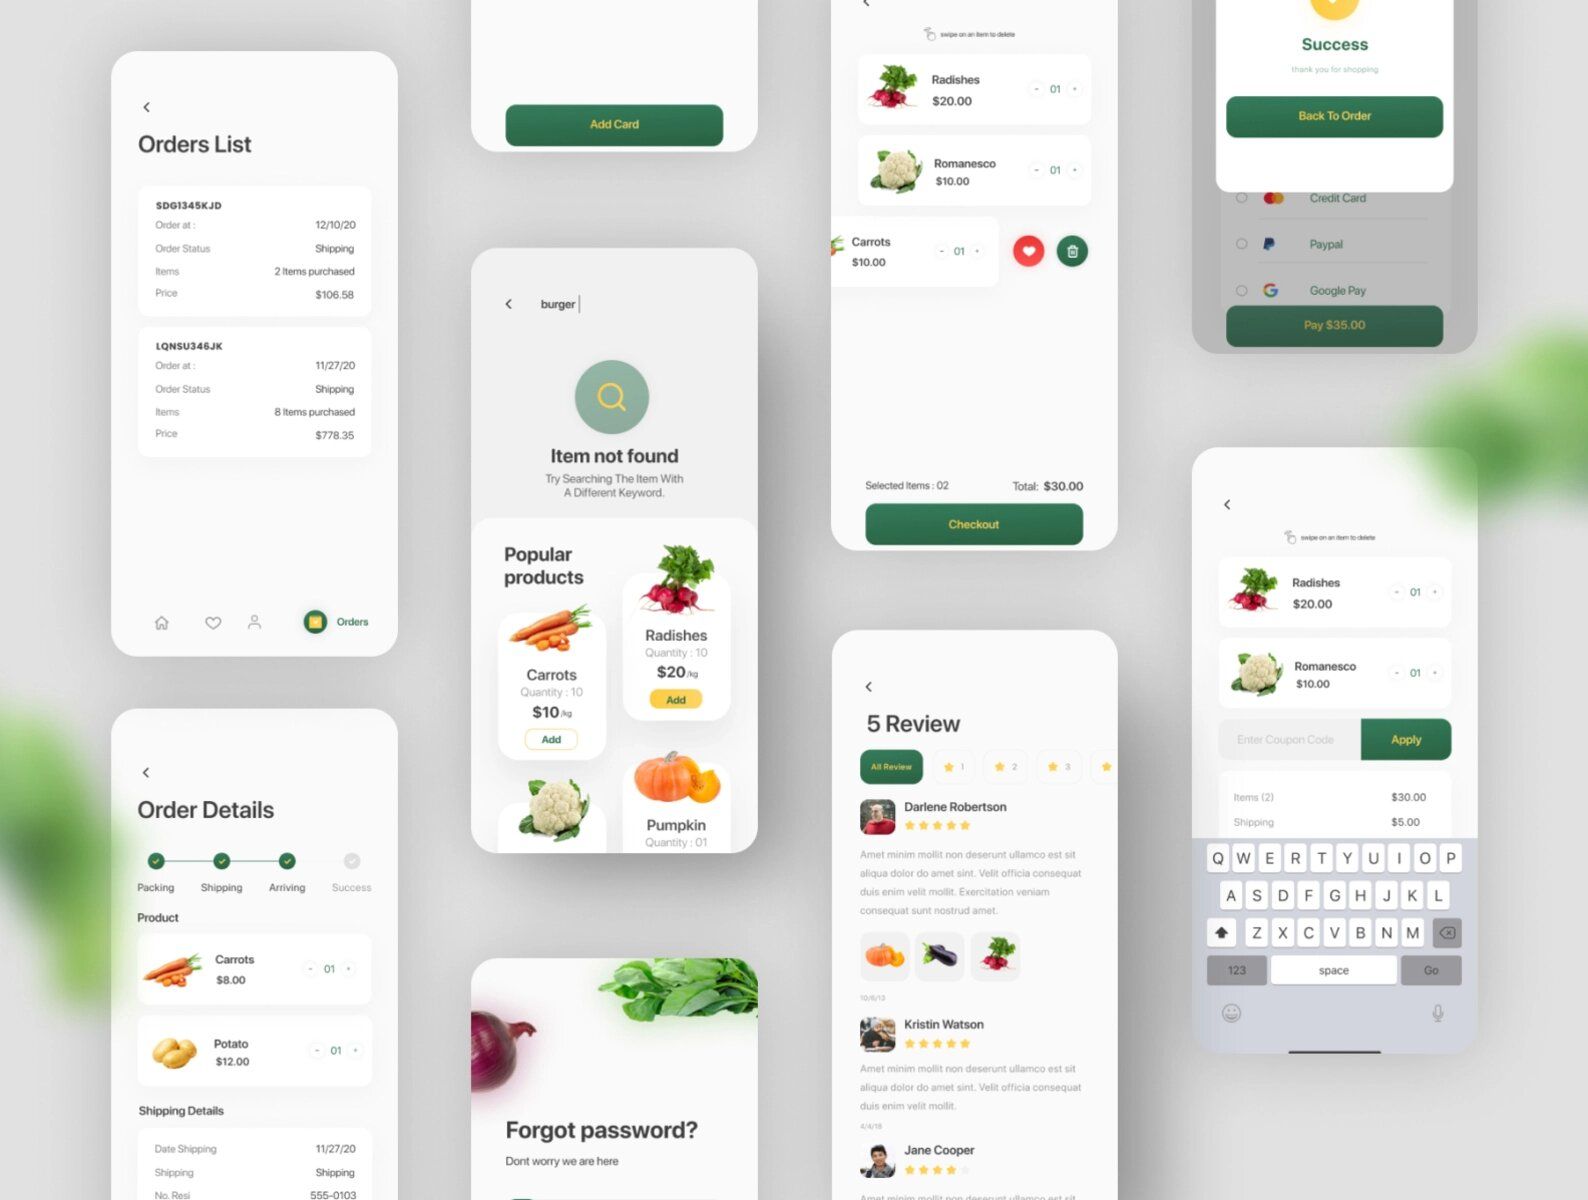 It’s a good idea to implement popular product section in search screen (*image by [Istiak Ahmed](https://dribbble.com/istiak_ahmed){ rel="nofollow" target="_blank" .default-md}*)